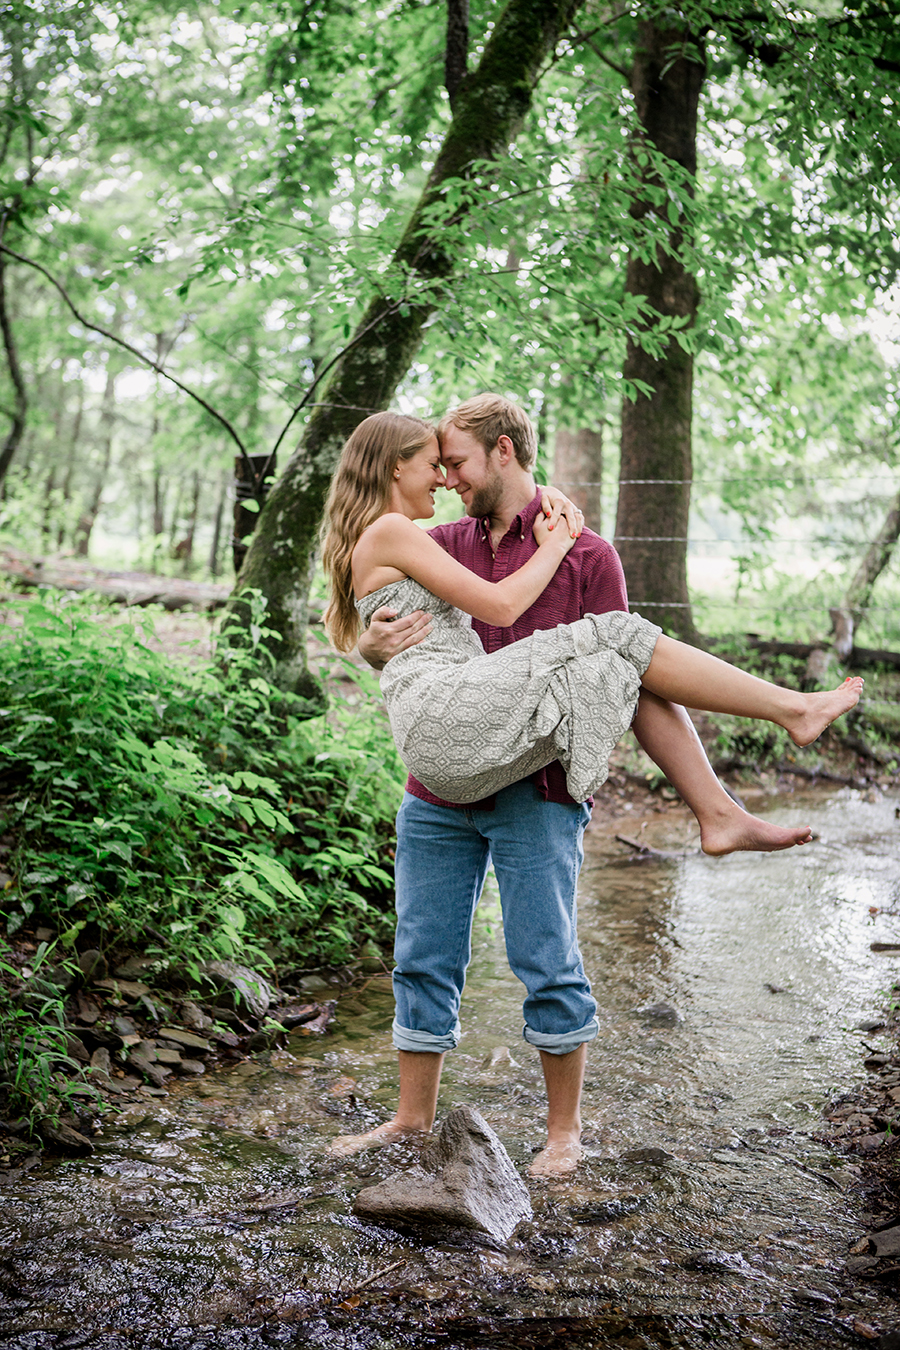 He cradles her engagement photo by Knoxville Wedding Photographer, Amanda May Photos.